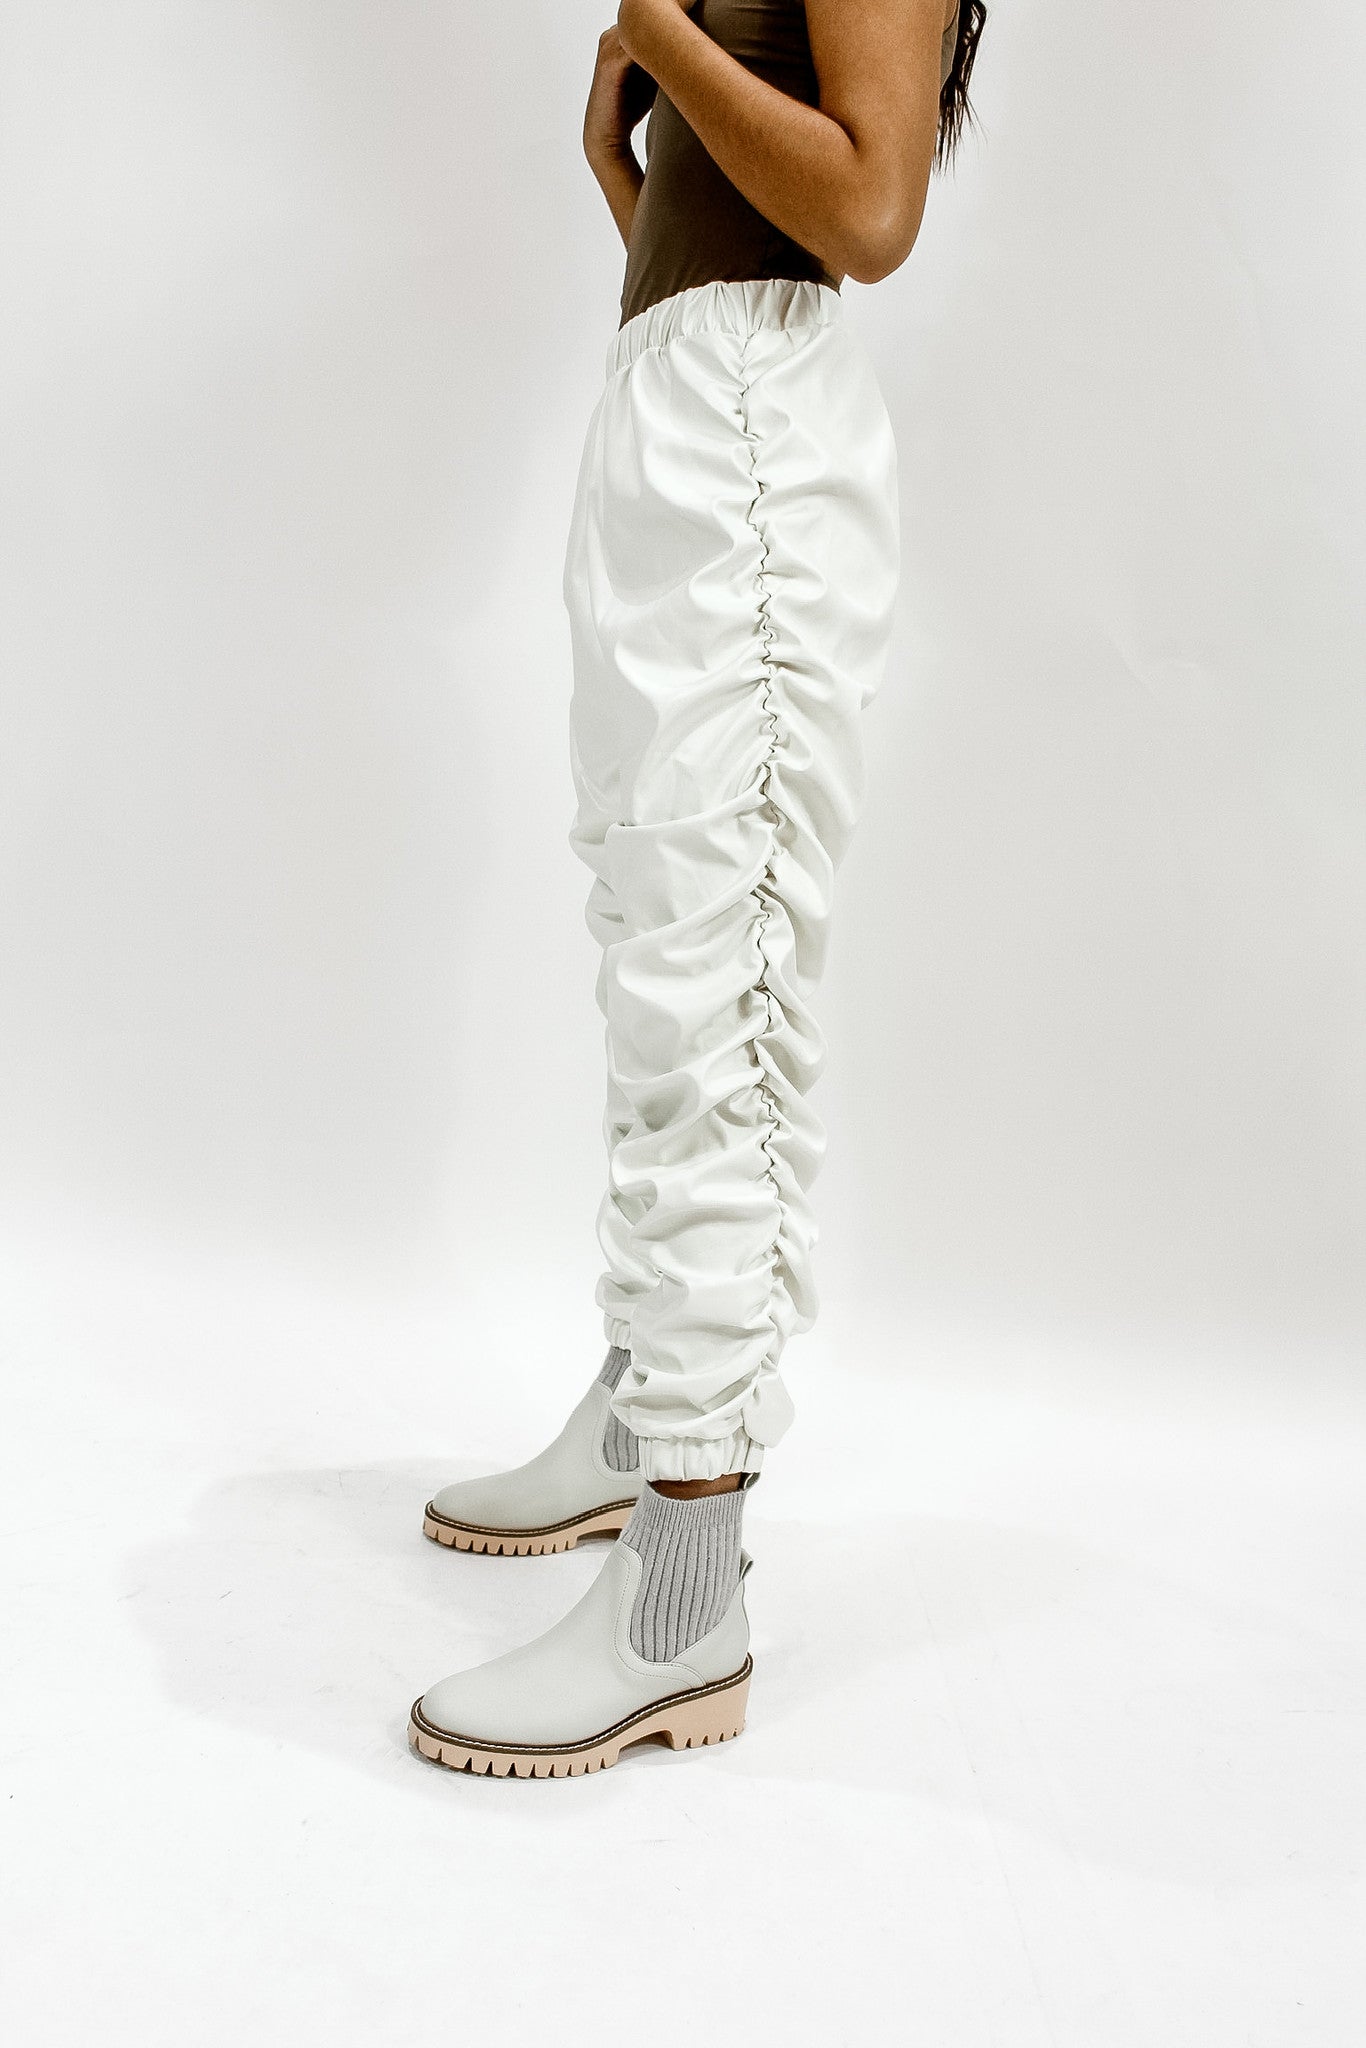 The Groove Leather Joggers